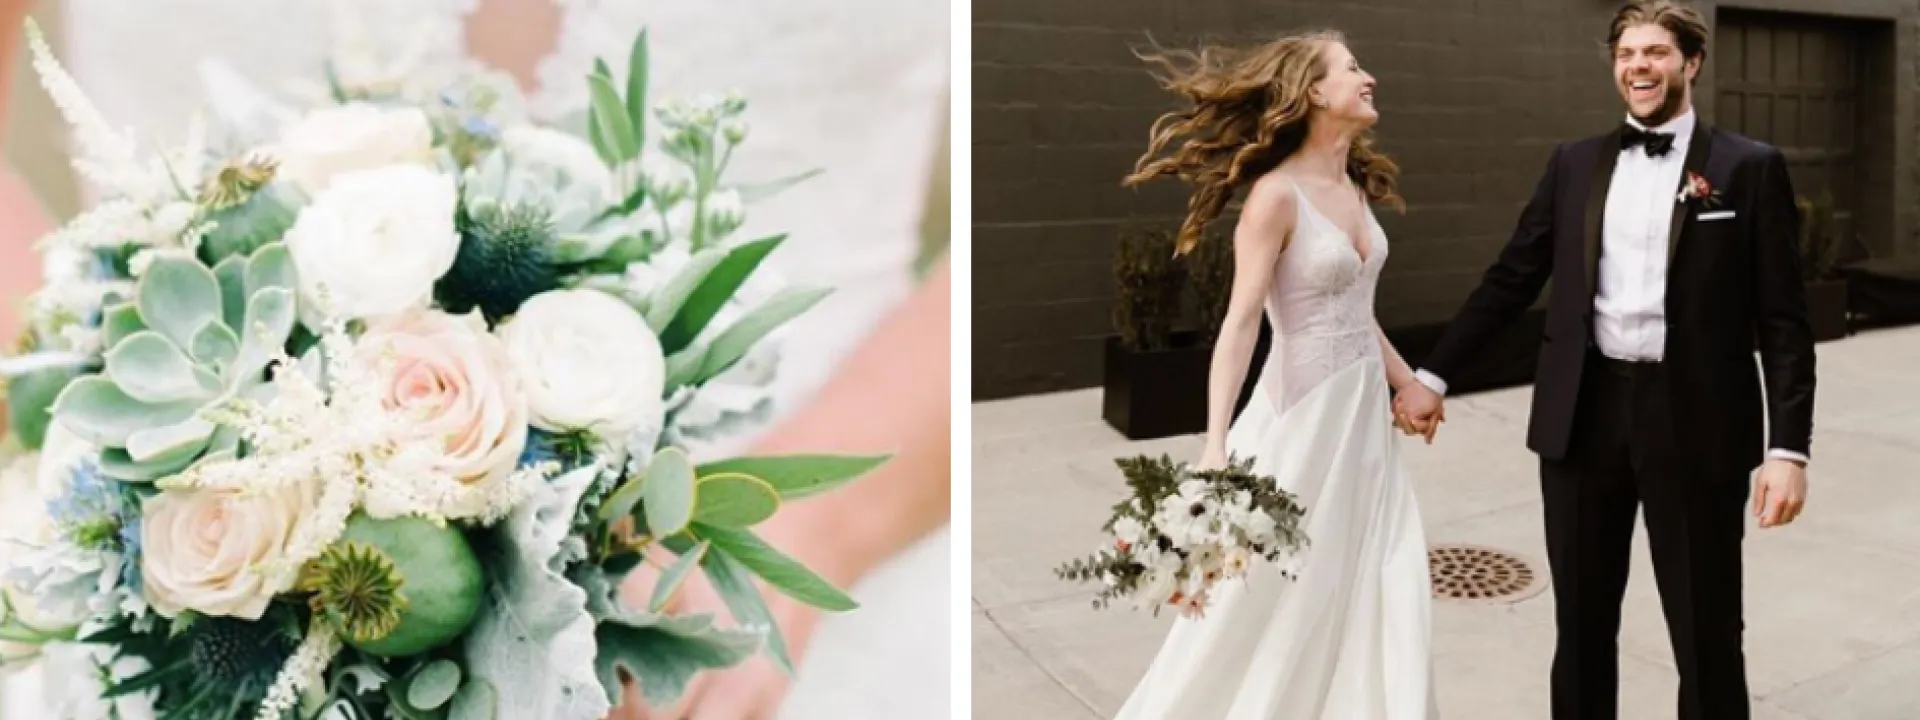 Timeless White Bouquets for the Minnesota Bride